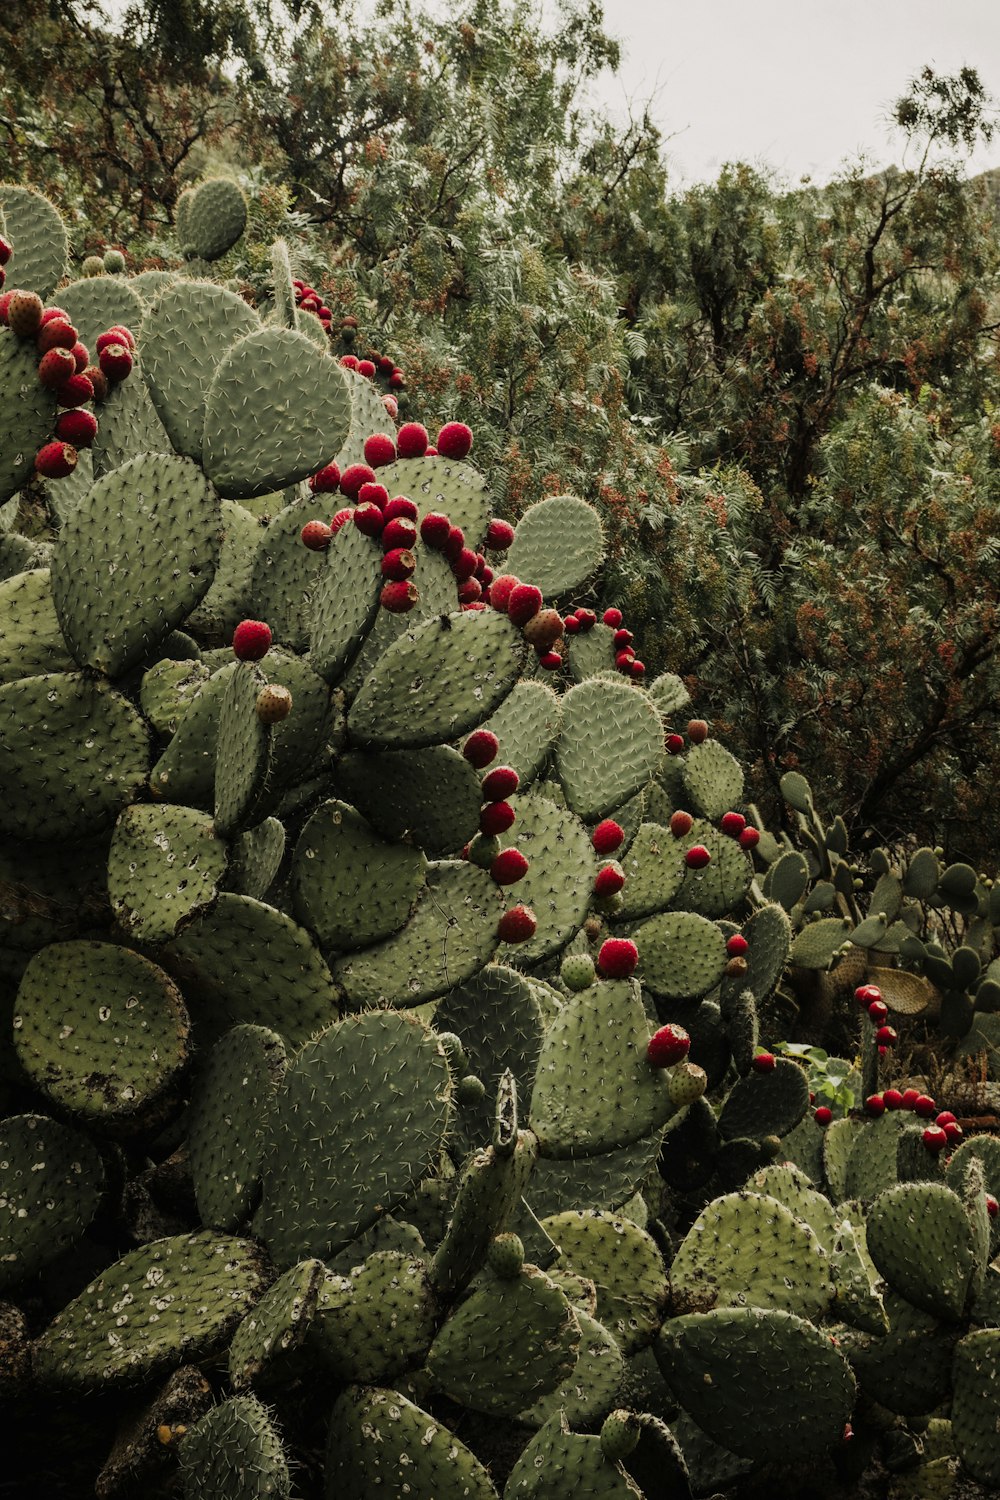 a large group of cactus plants with red berries on them